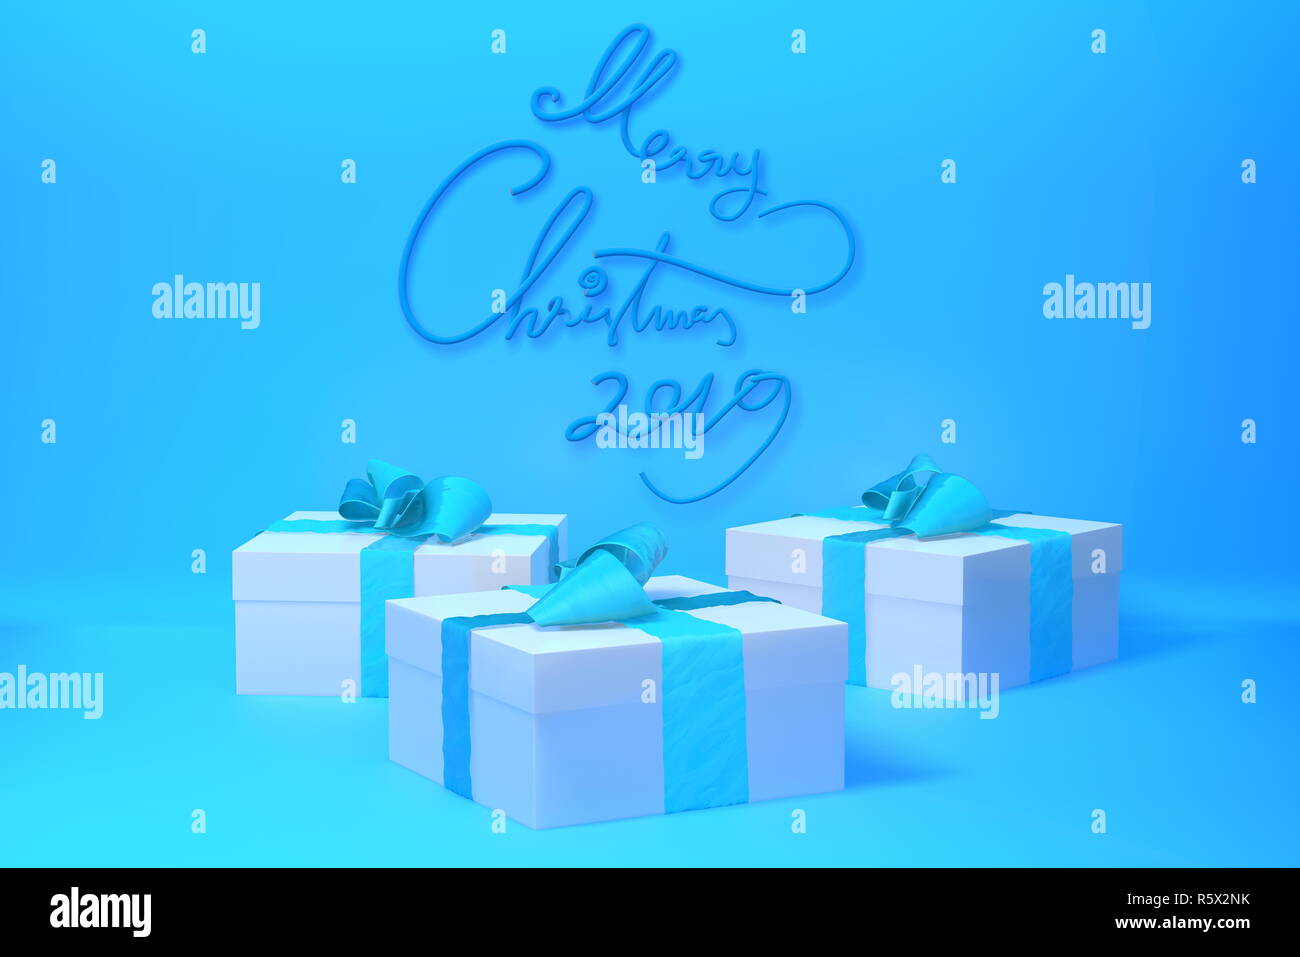 Merry Christmas 2019 lettering written on blue color wall and three present gift boxes with bows beside. 3d illustration Stock Photo